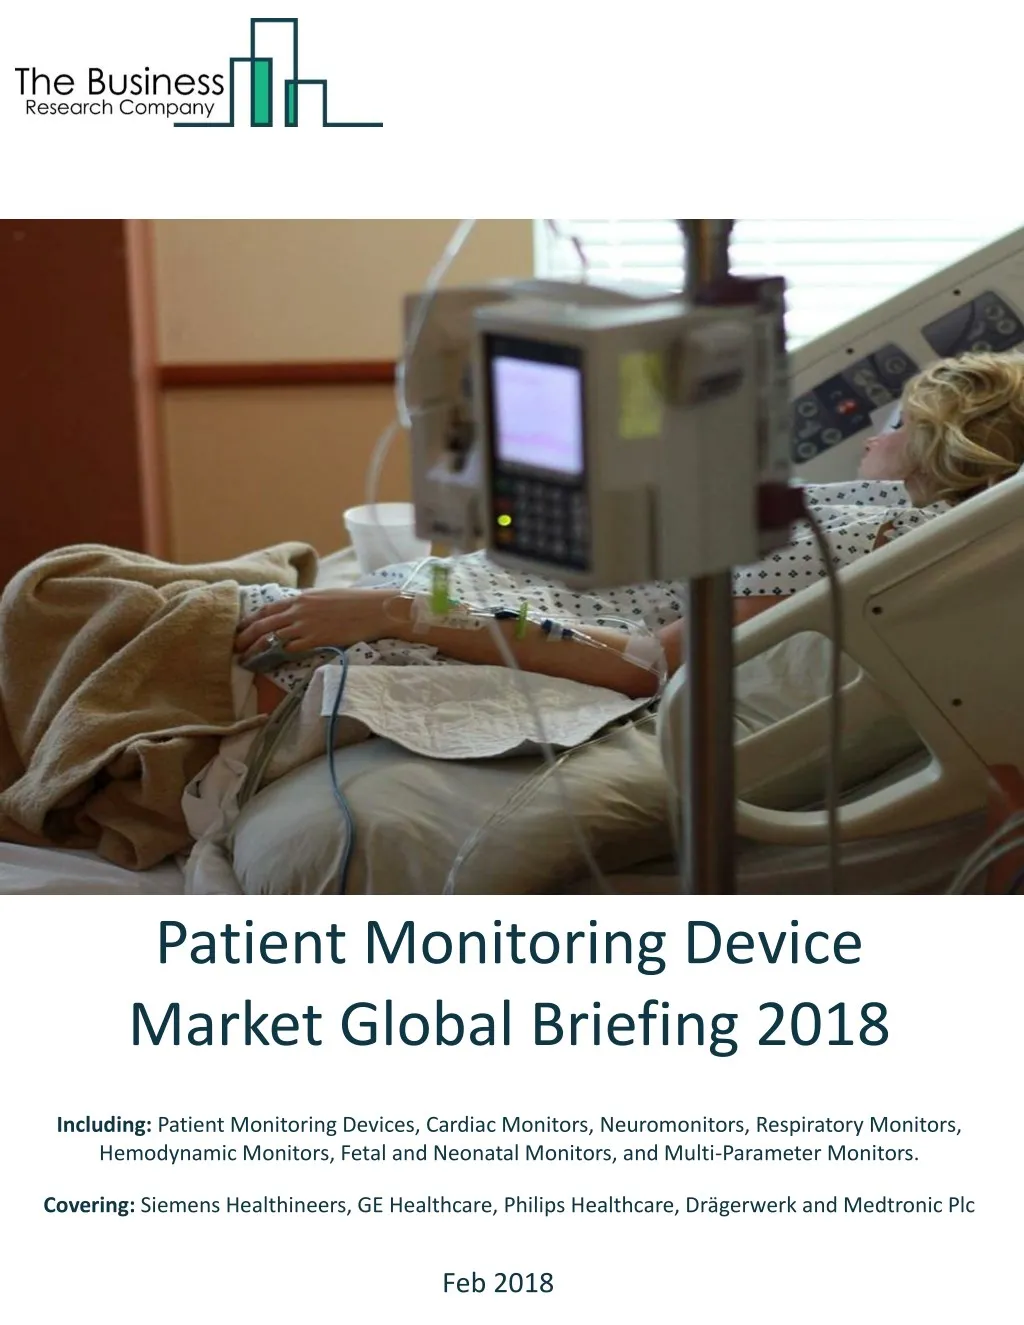 patient monitoring device market global briefing